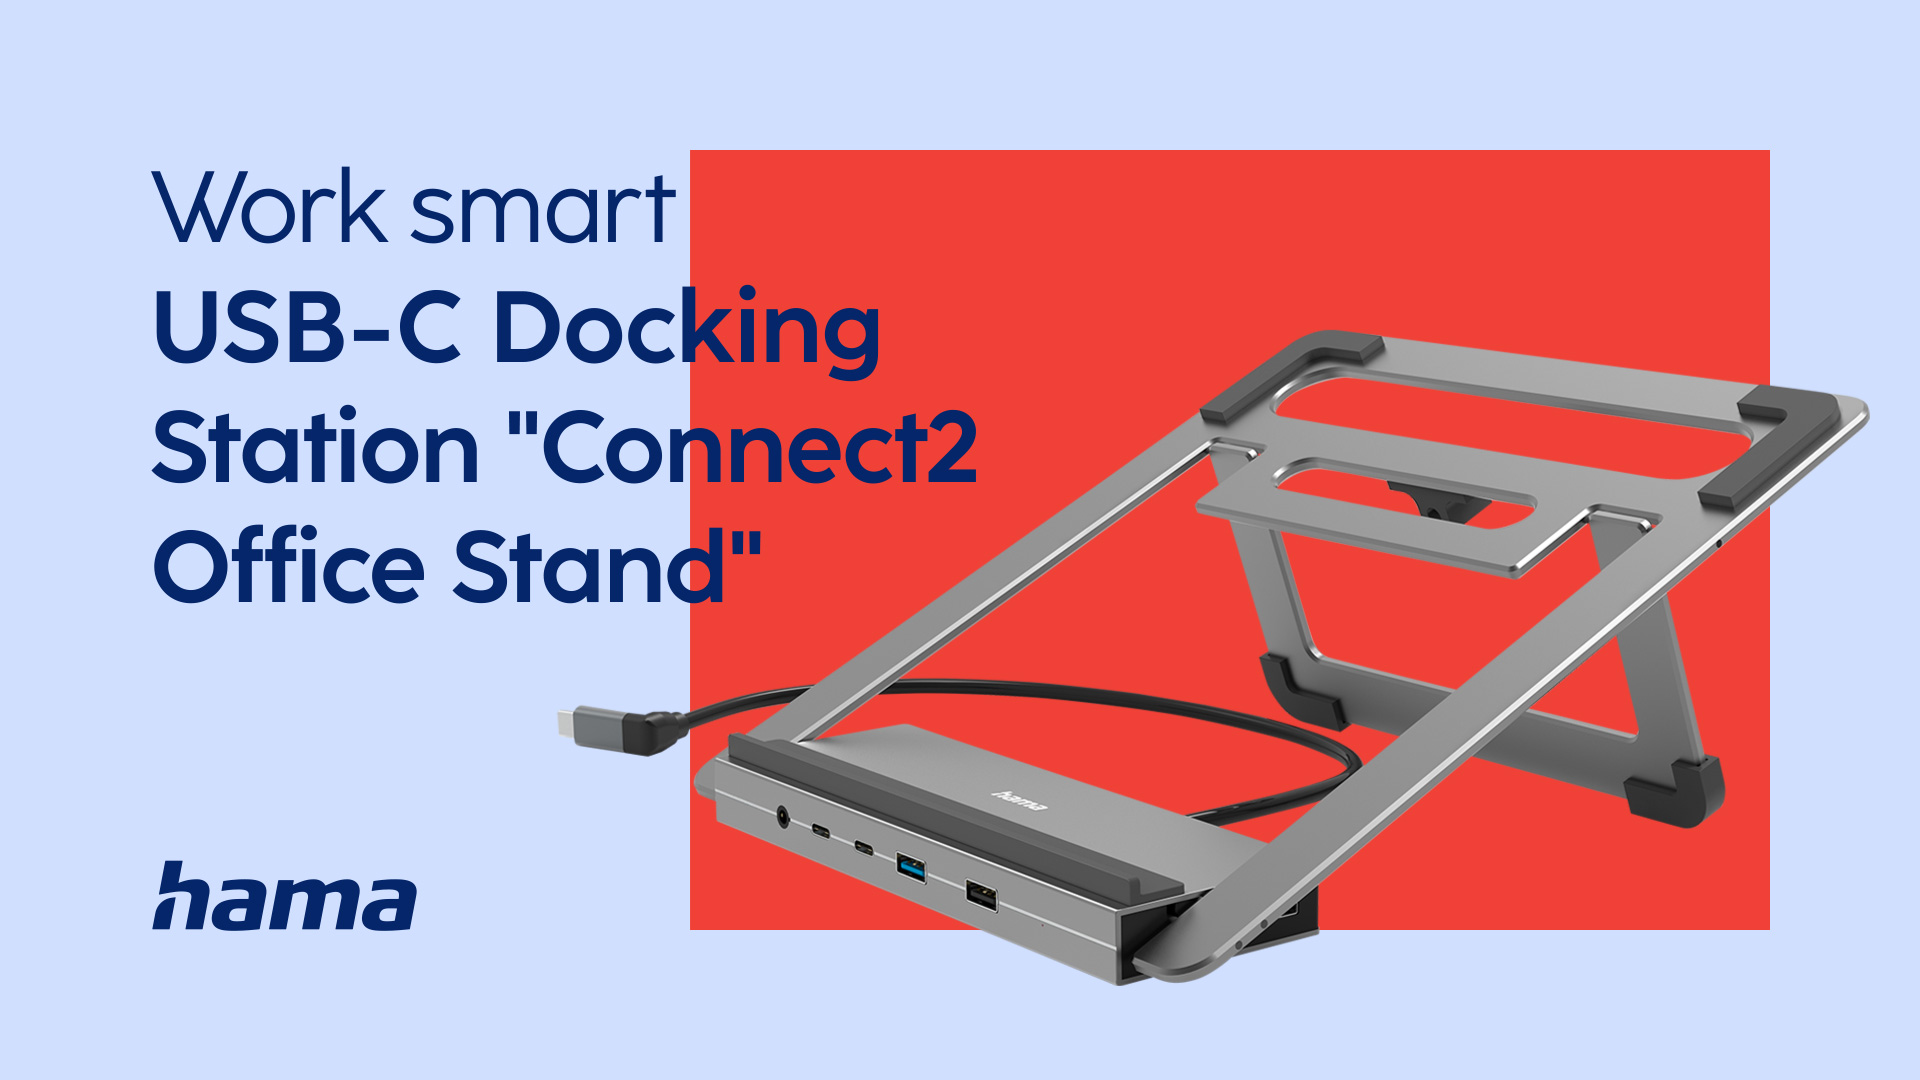 Hama USB-C docking station "Connect2Office Stand"